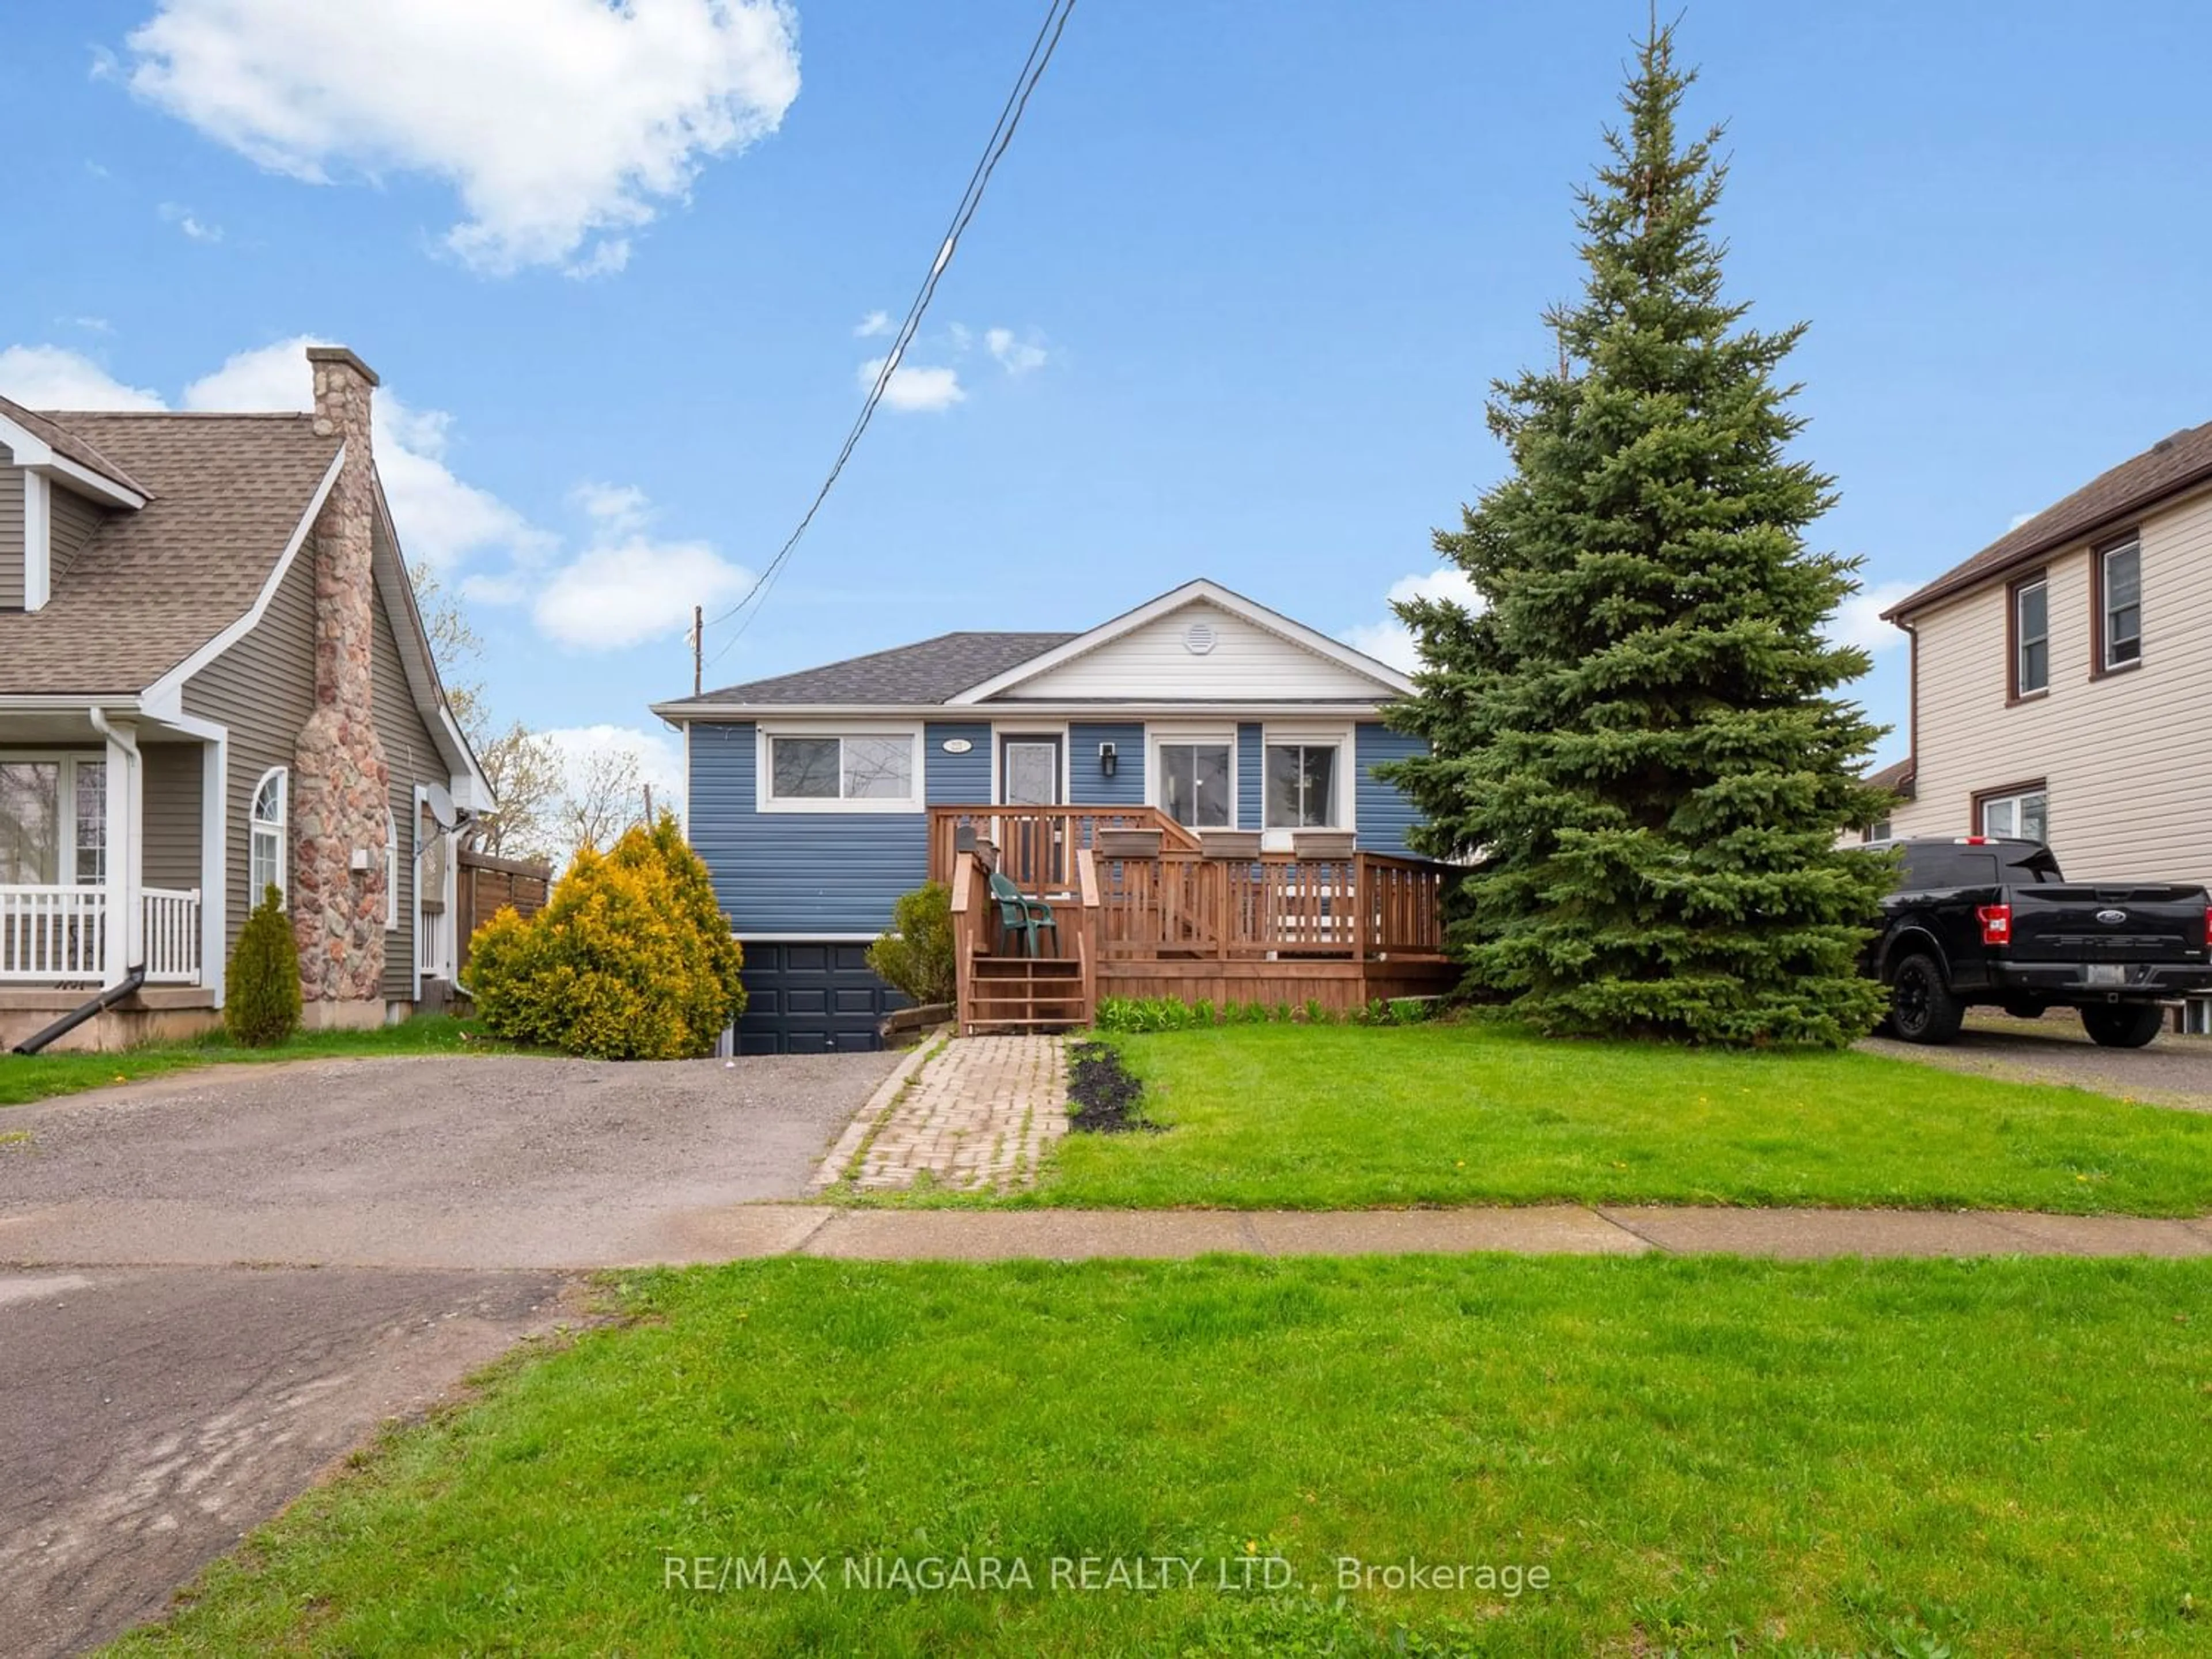 Frontside or backside of a home for 221 Beatrice St, Welland Ontario L3B 2Z6